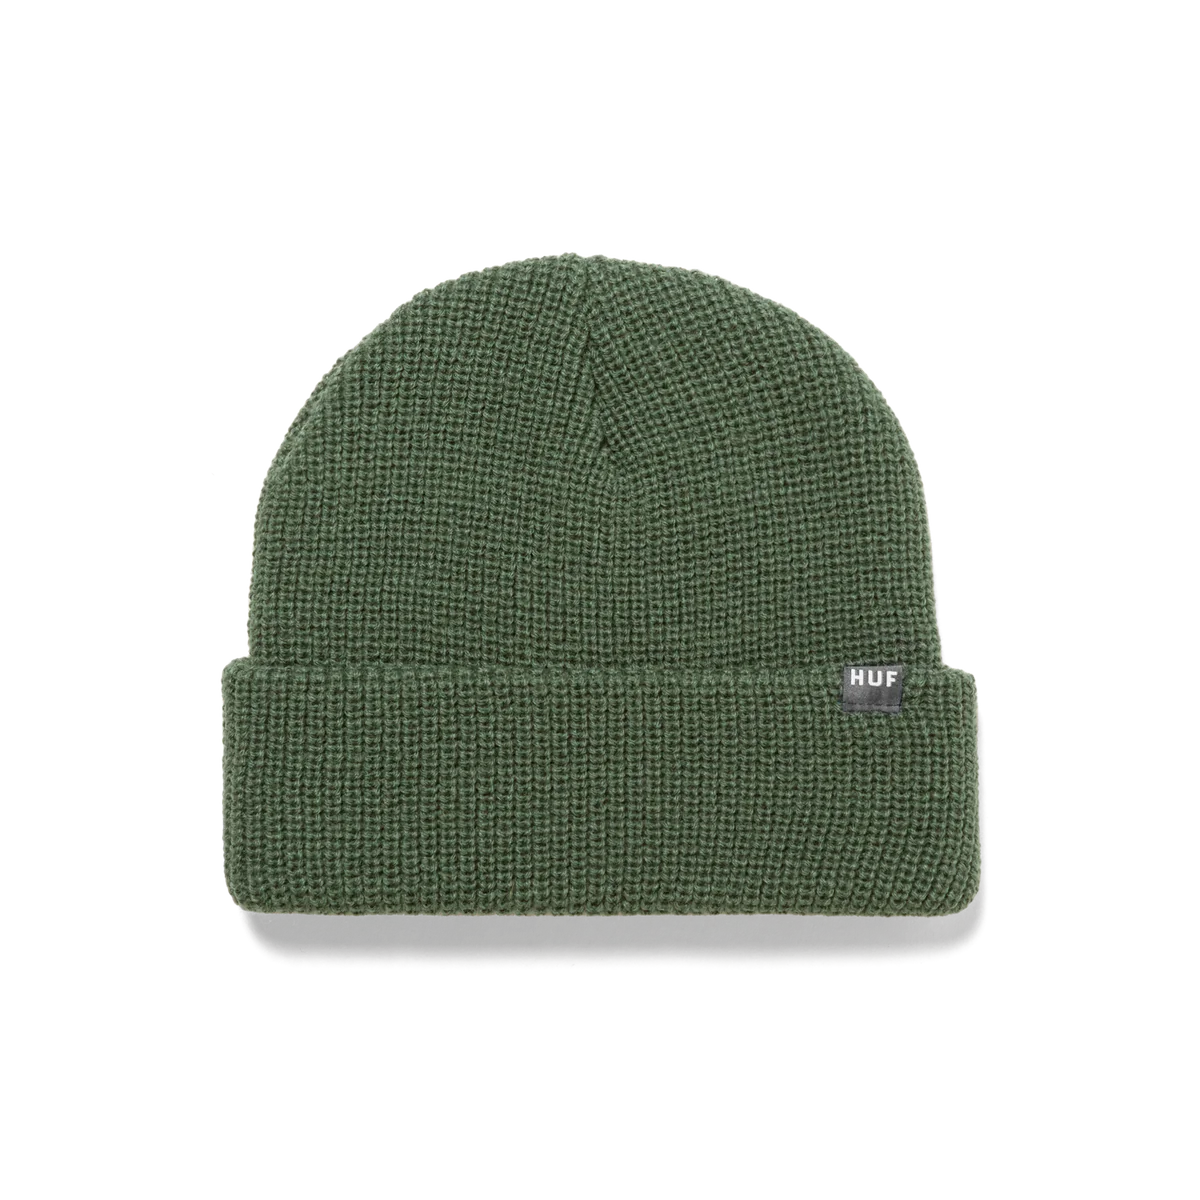 HUF - USUAL BEANIE - LIGHT OLIVE